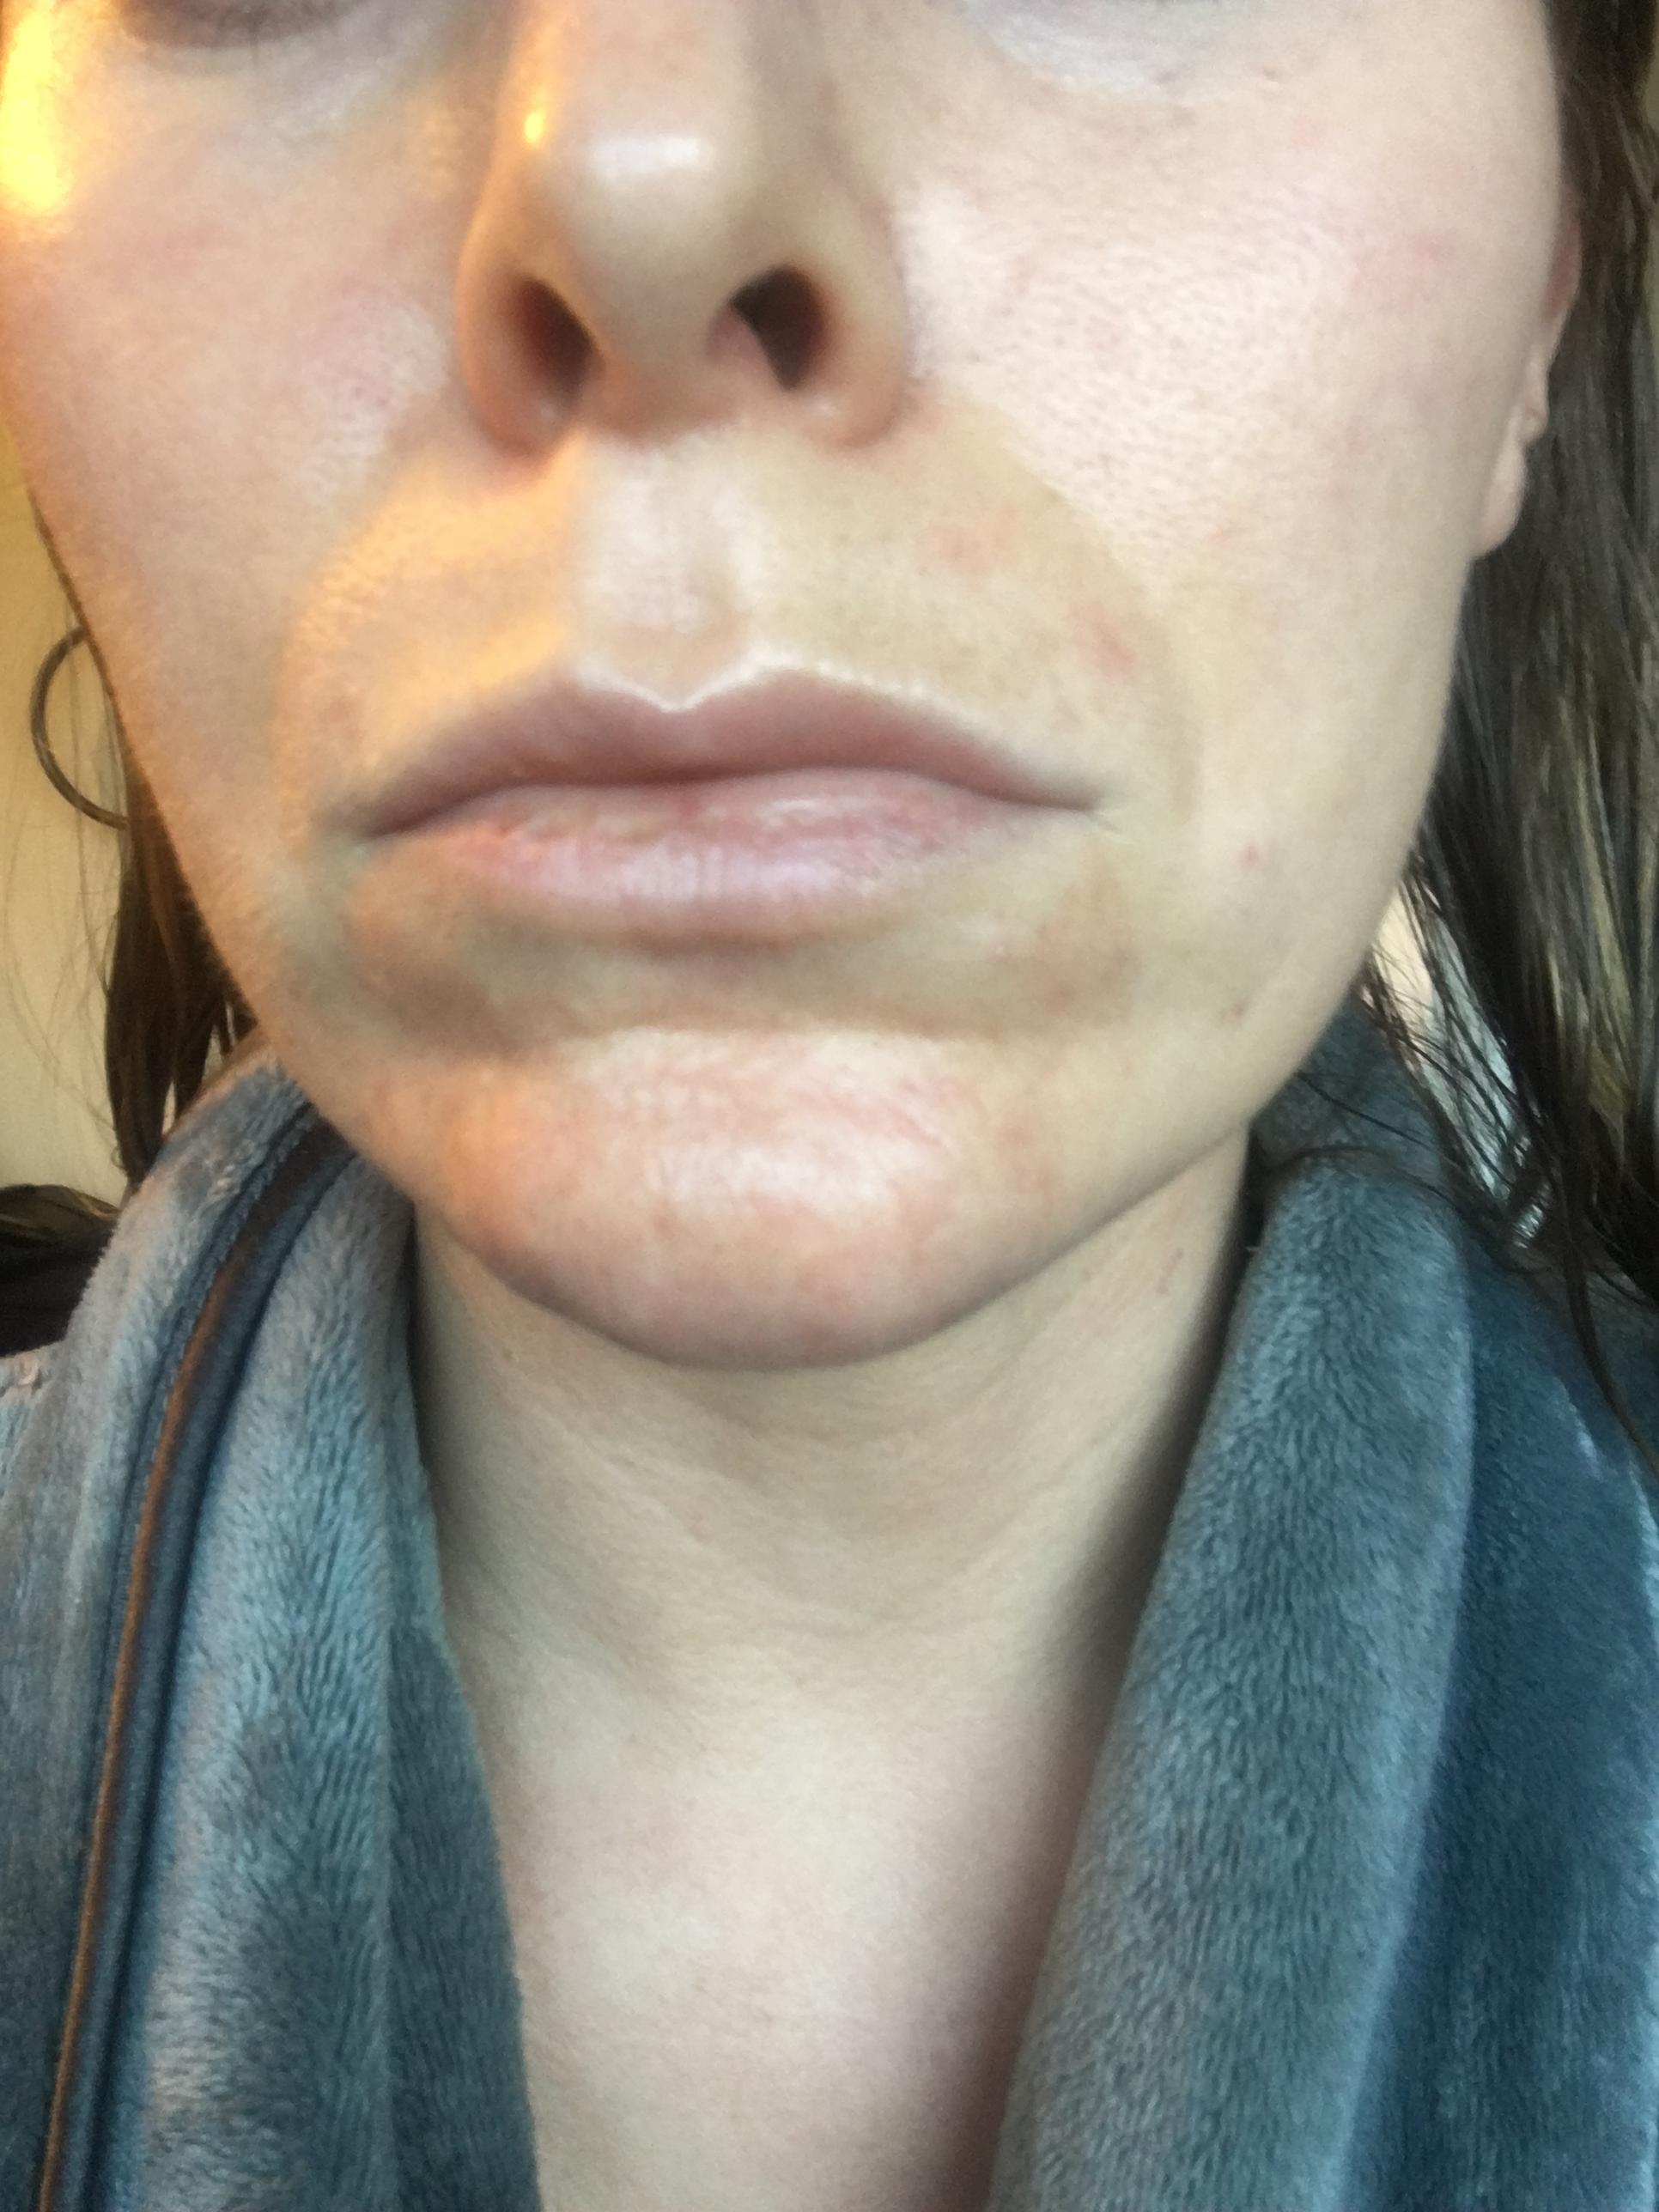 Cystic Acne On Chin 9 Months After Stopping Yasmin General Acne 0058